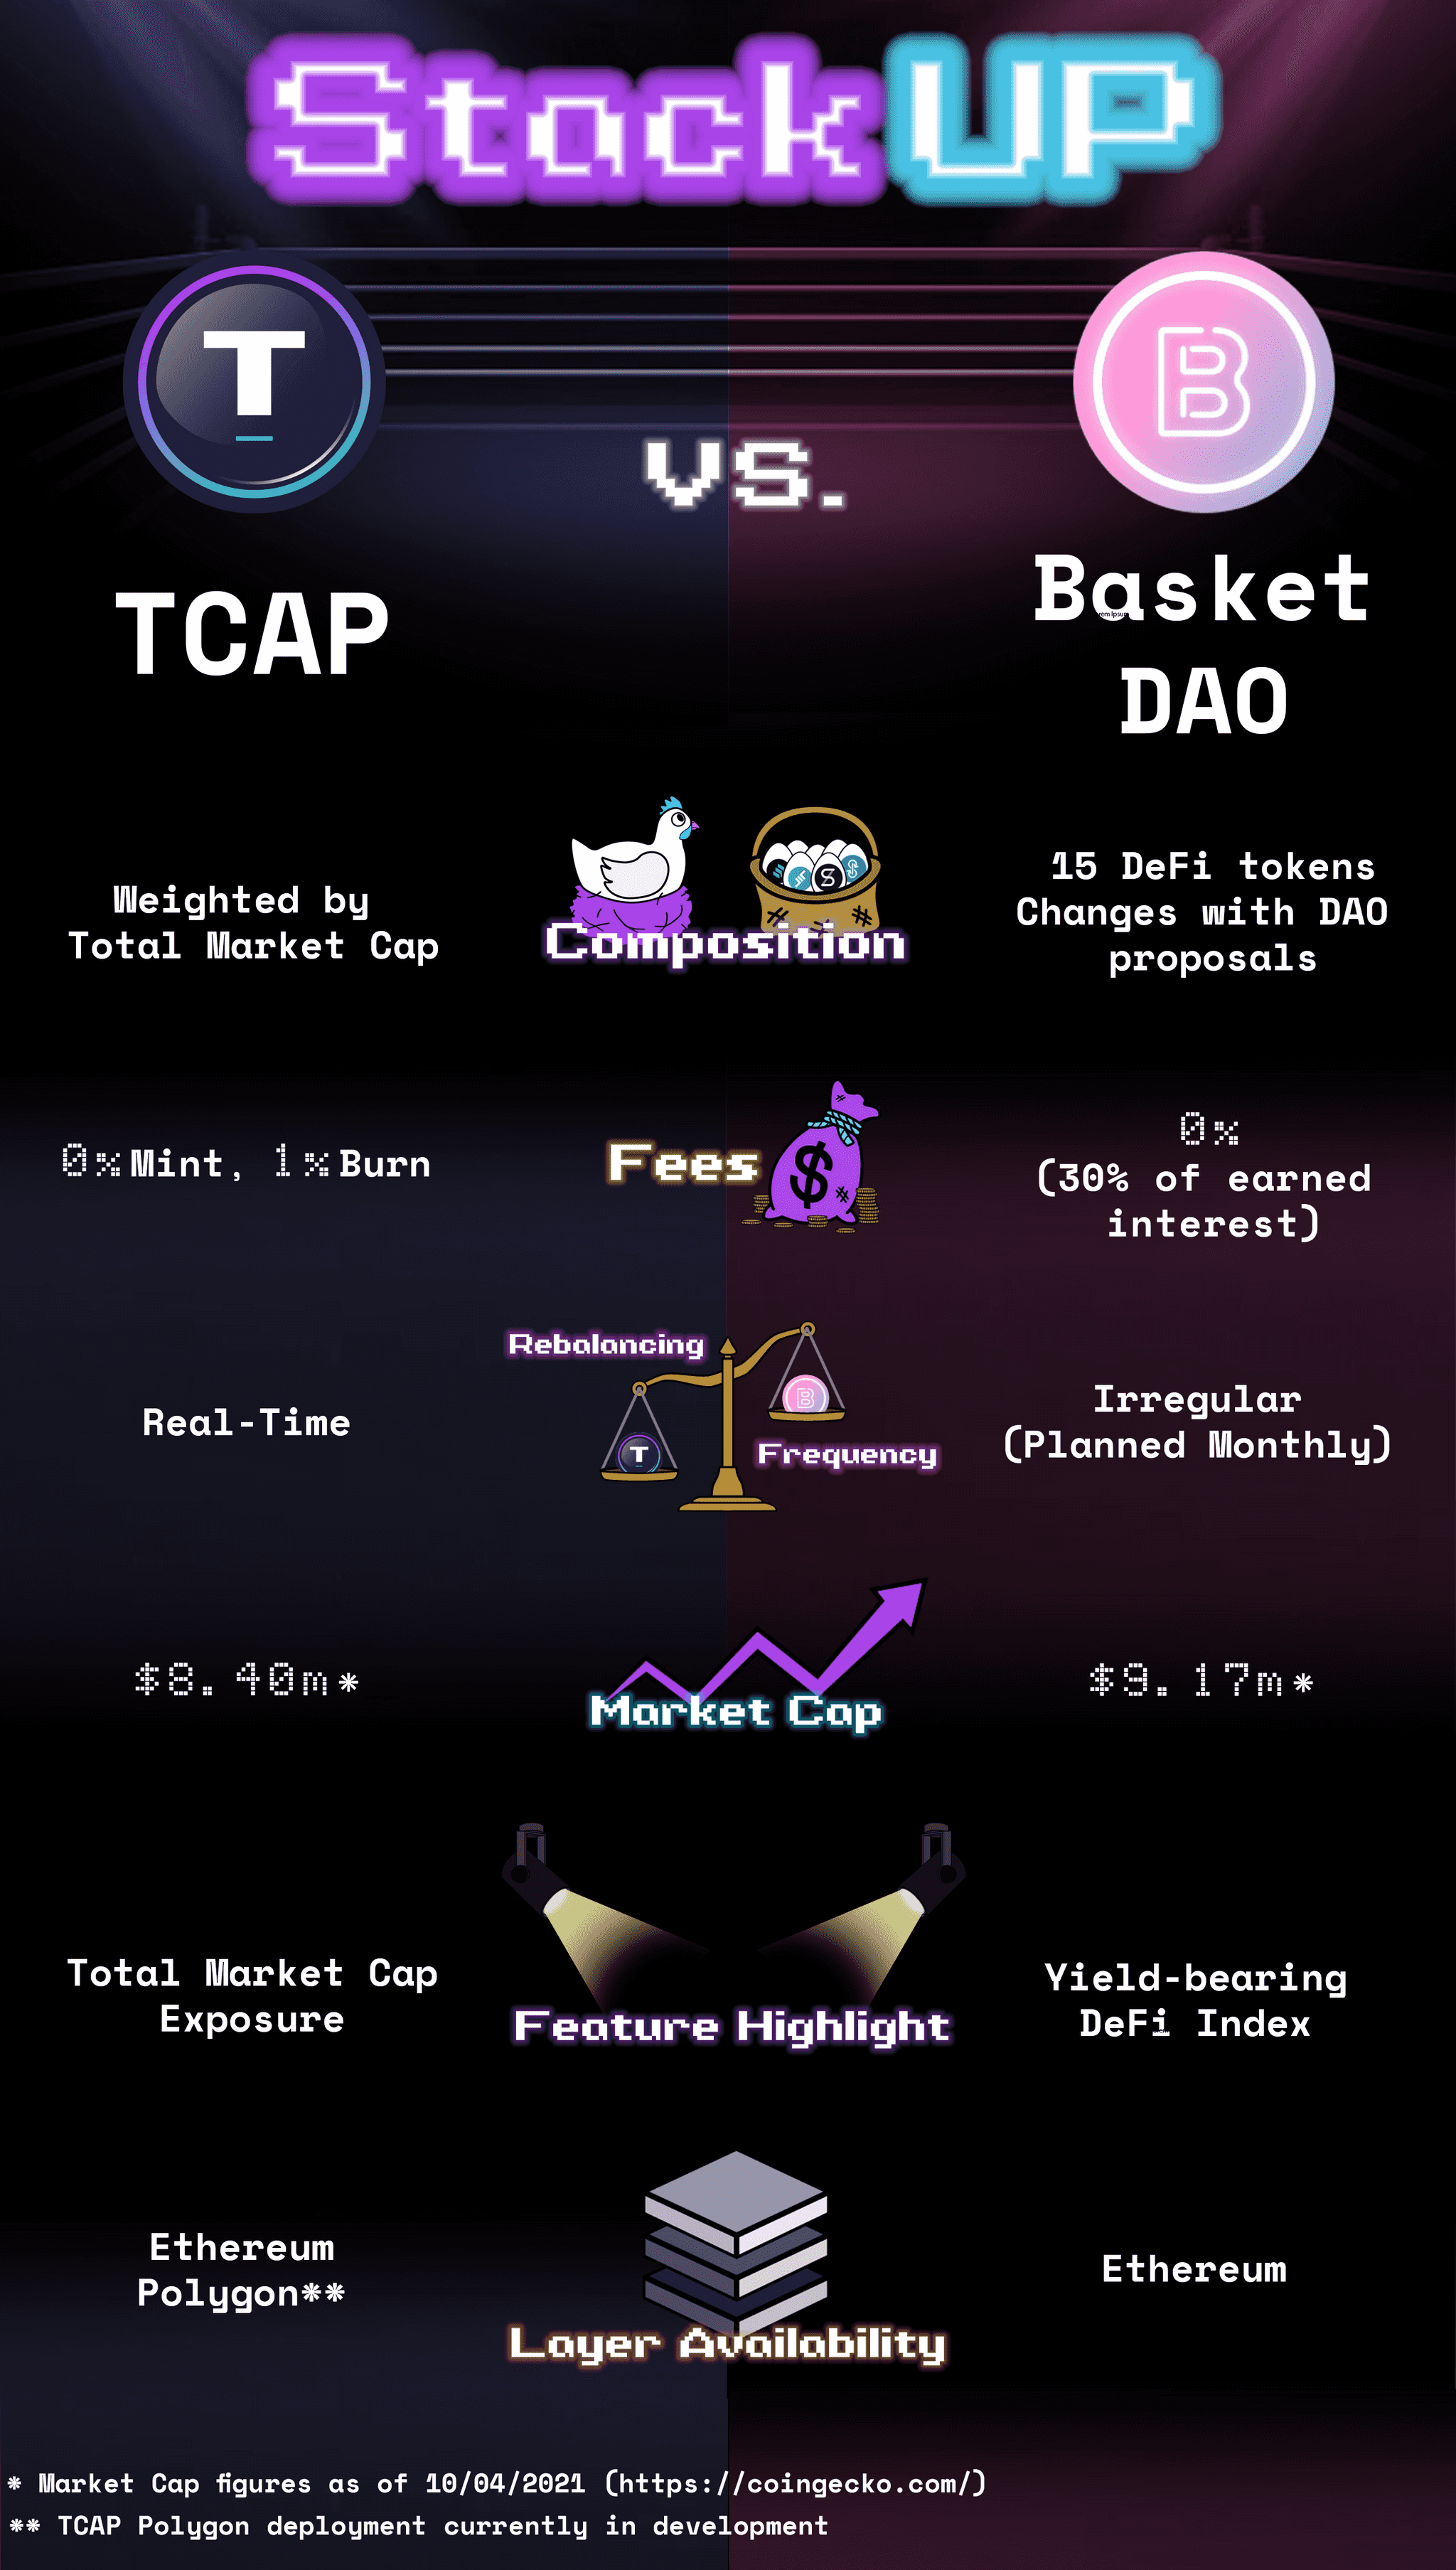 stackup tcap vs  basktdao infographic draft 5